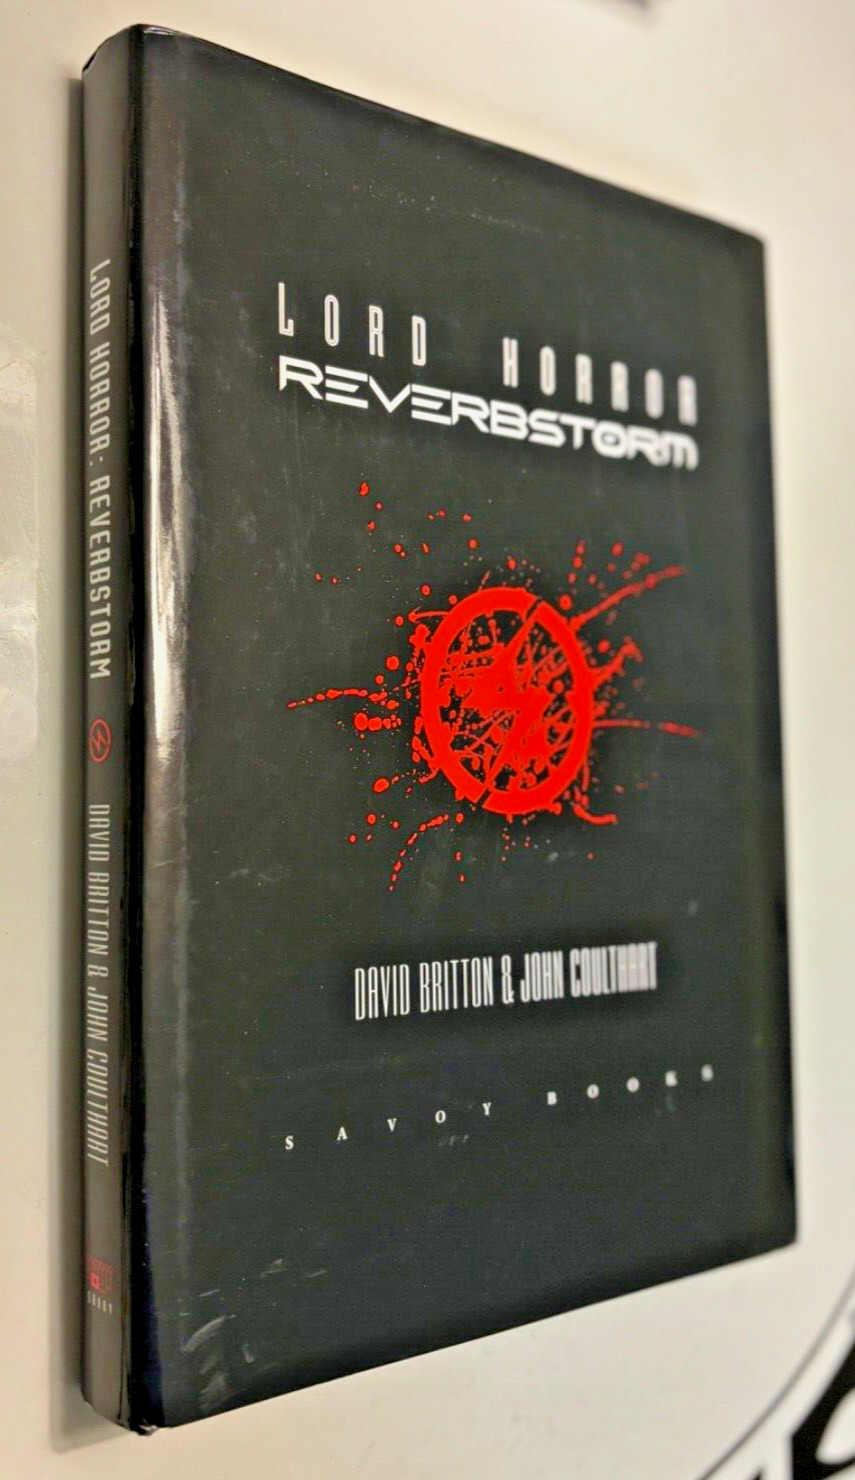 David Britton & John Coulthart - LORD HORROR: REVERBSTORM Hardcover 2012 Exc